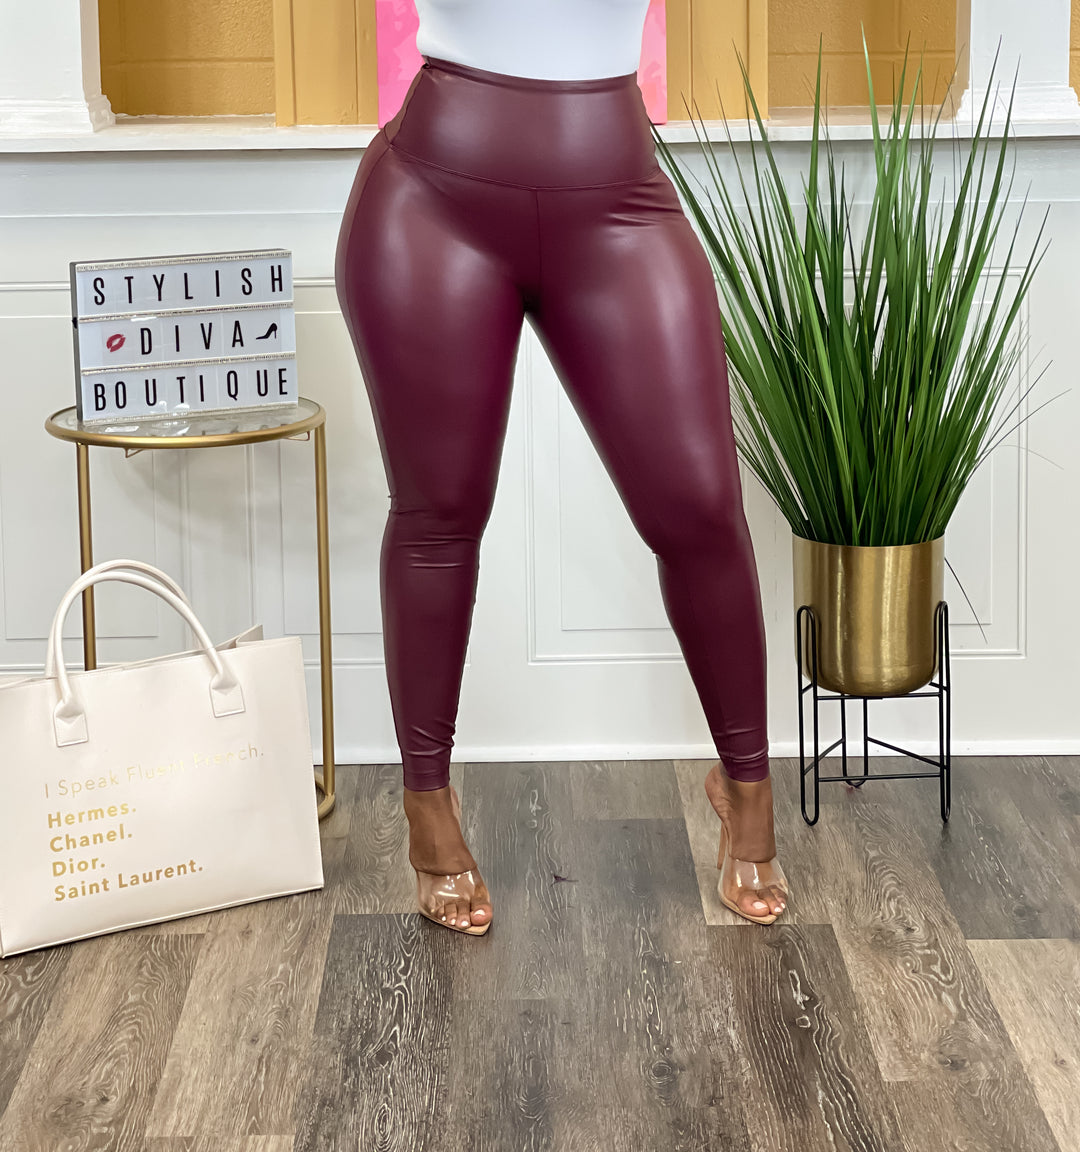 Soft Surroundings Maroon Faux Leather Leggings Large - $40 - From